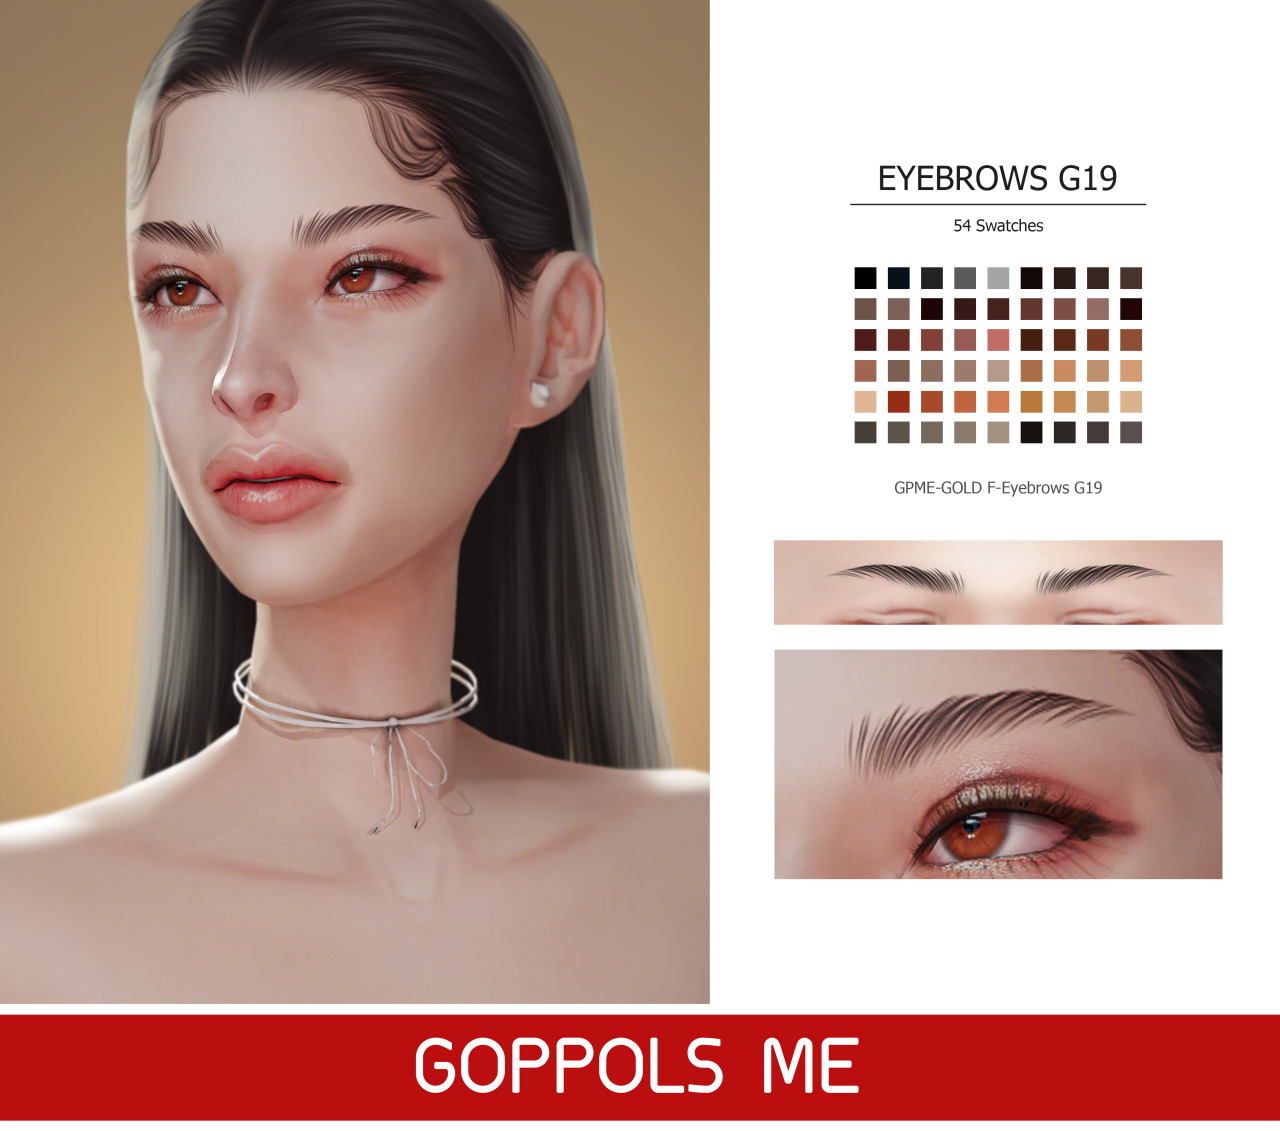 GPME-GOLD F-Eyebrows G19DownloadHQ mod compatibleAccess to Exclusive GOPPOLSME Patreon onlyThank for support me  ❤  Thanks for all CC creators ❤Hope you like it .Please don’t re-upload #goppolsme#thesims4#sims4cc#ssims4cc#sims4ccfinds#sims4brow#s4cc#s4ccfinds#s4brows